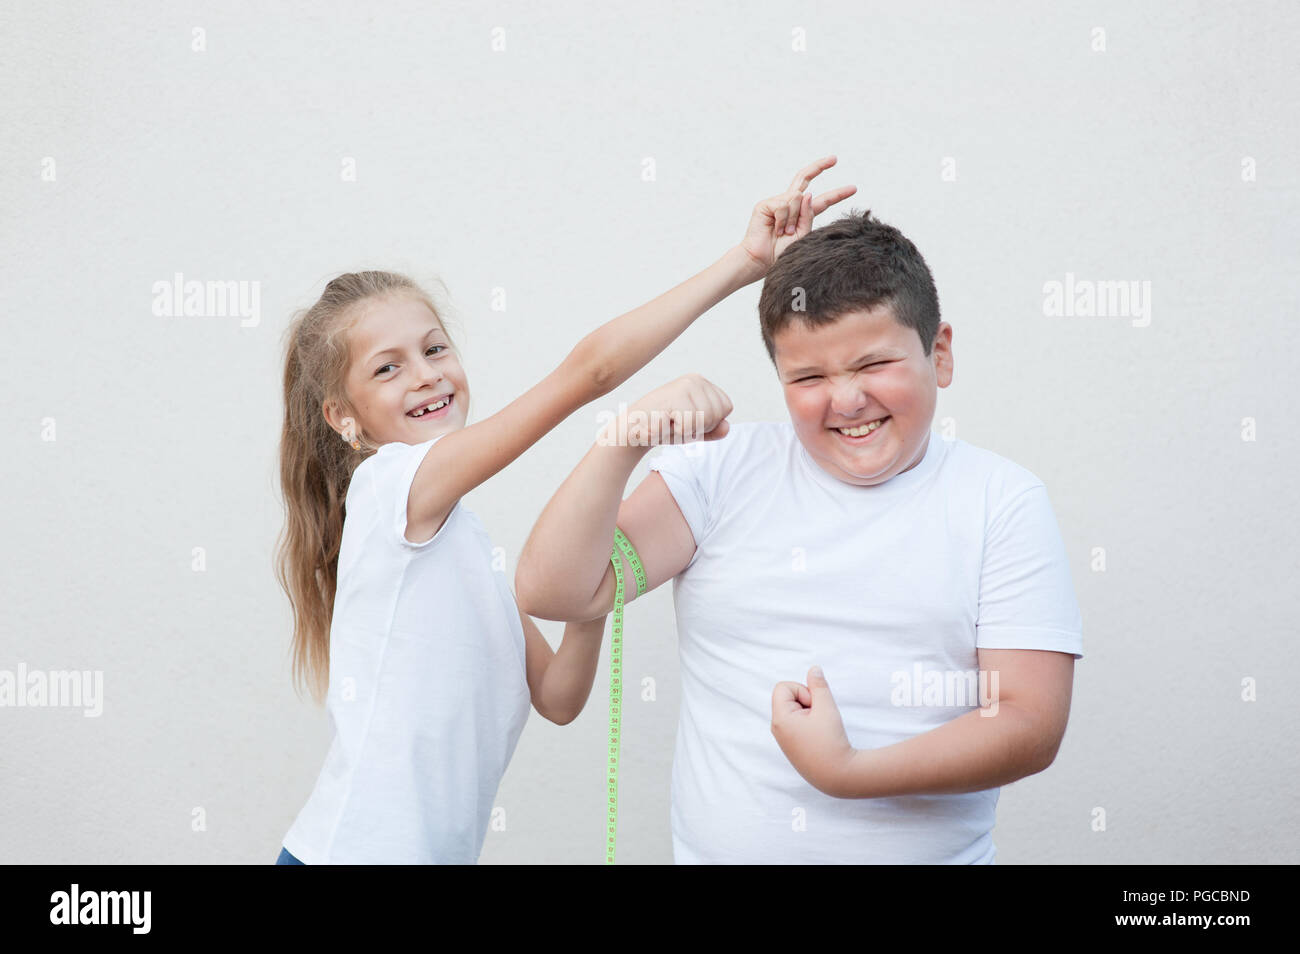 funny caucasian thin small girl measuring smiling fat boy muscle by tape fooling around Stock Photo